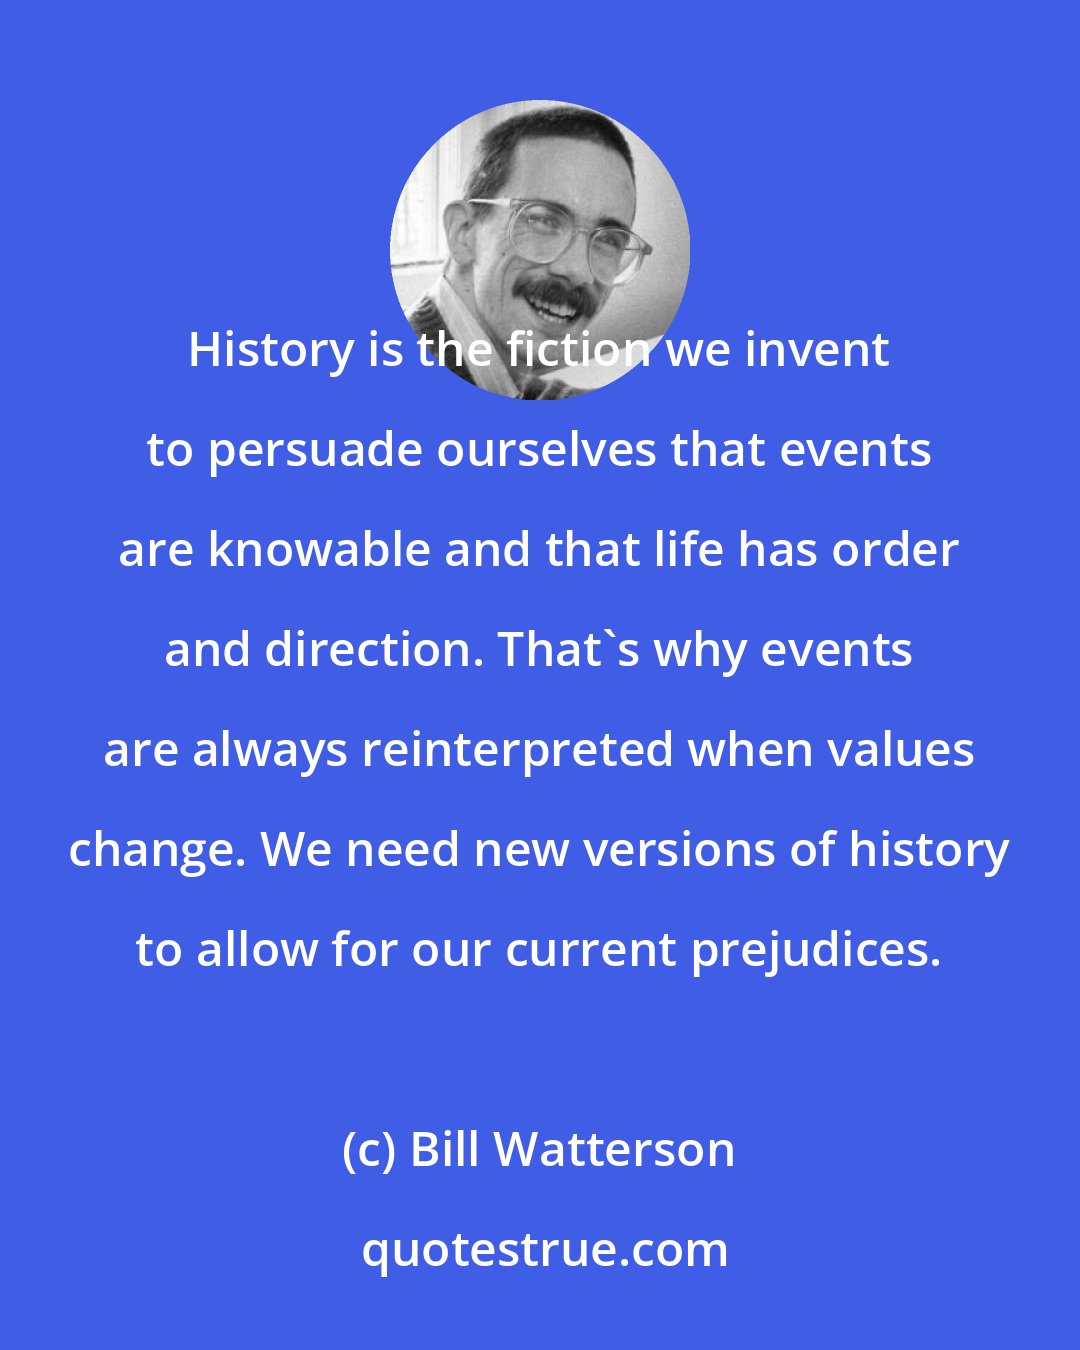 Bill Watterson: History is the fiction we invent to persuade ourselves that events are knowable and that life has order and direction. That's why events are always reinterpreted when values change. We need new versions of history to allow for our current prejudices.